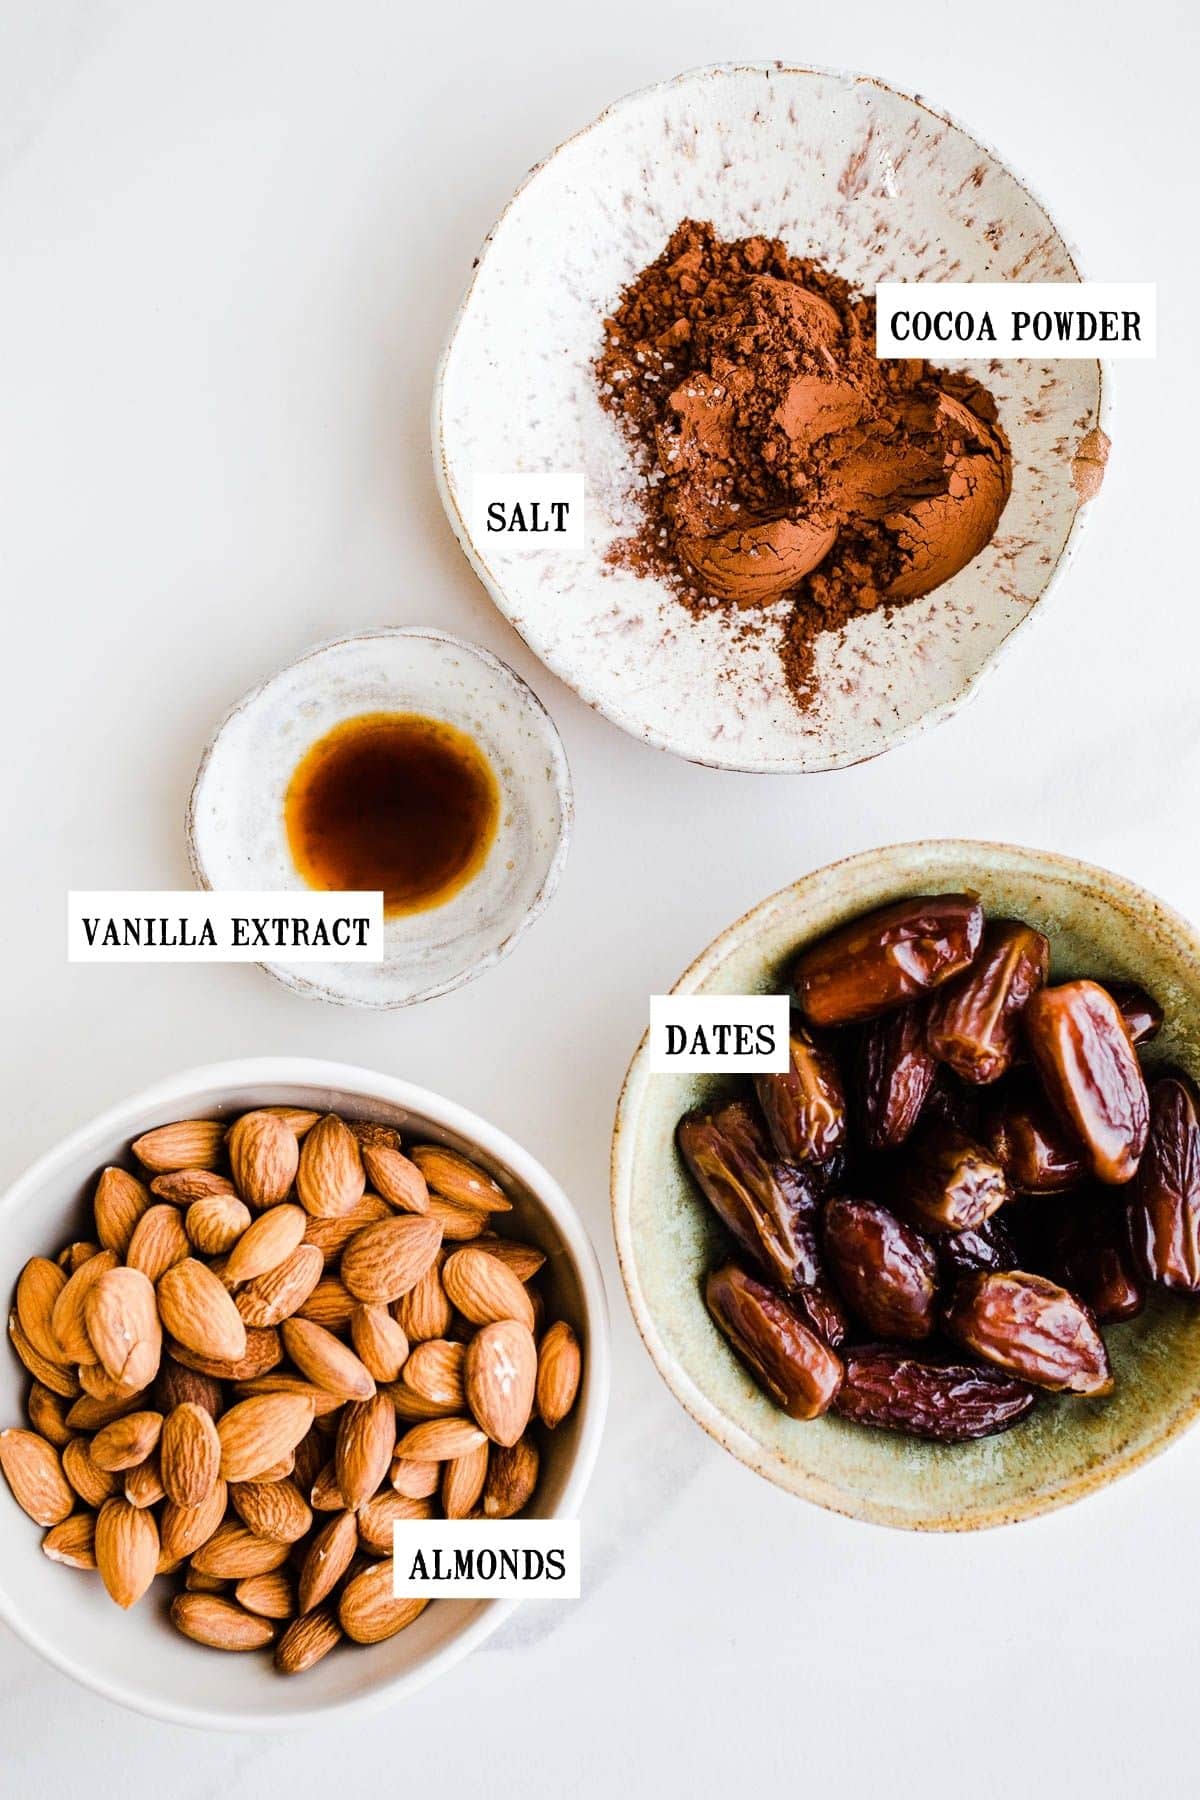 Ingredients for energy balls in bowls including cocoa powder, salt, vanilla extract, dates, and almonds.